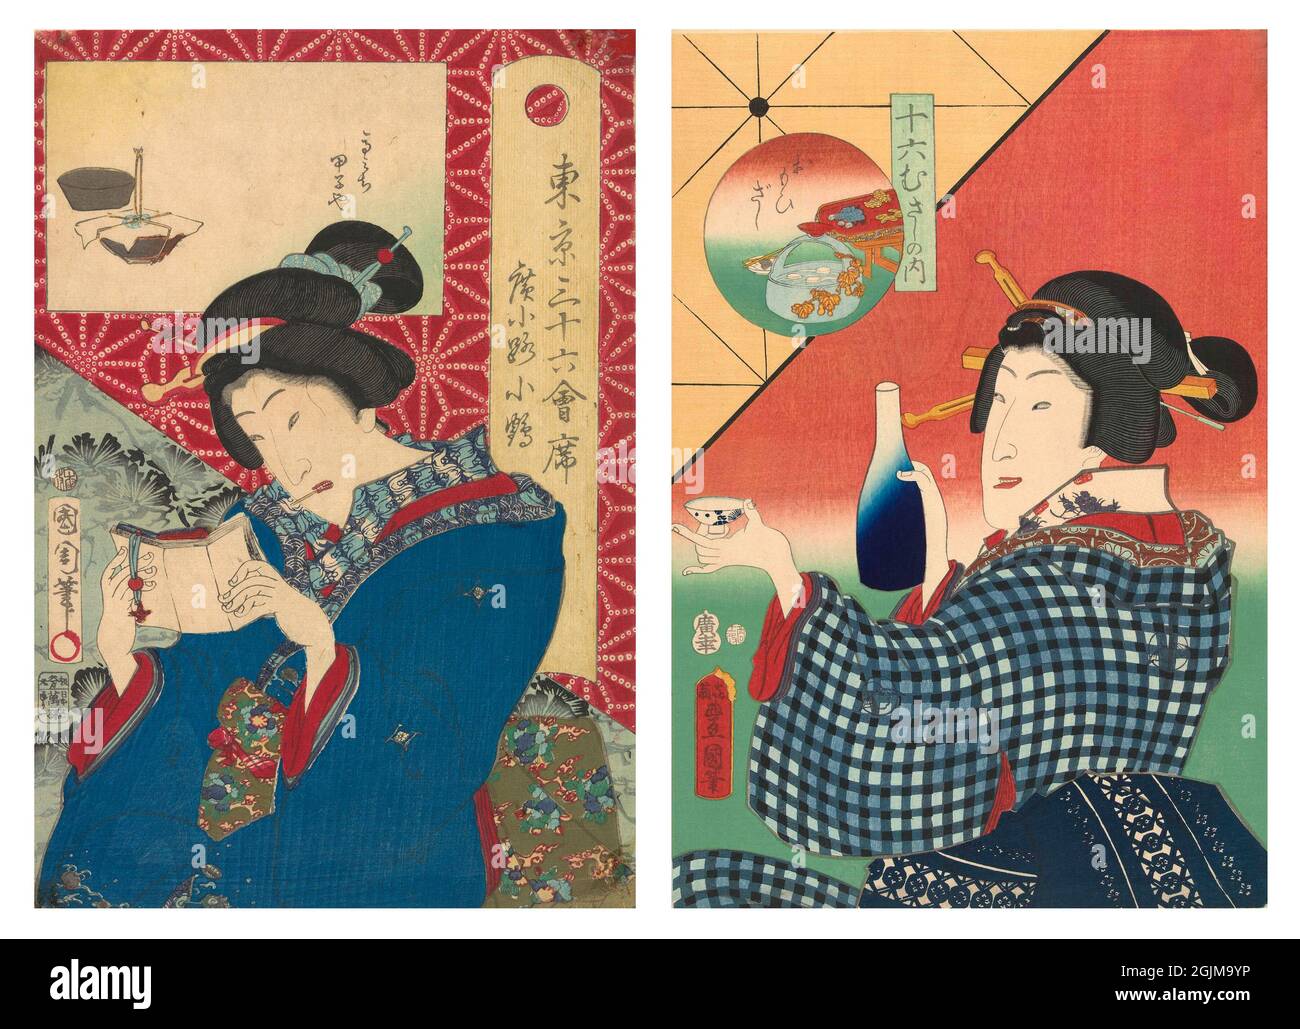 Selection of 2 Japanese painted woodcuts. Left: Japanese women in kimono reading. Right: Woman holding sake cup in left hand and sake bottle in right hand, against green, red and yellow background. Circular cartouche top left with face on blue basket next to red plateau with food items.  Unique optimised and enhanced arrangement of two nineteenth century Japanese woodcut illustrations. Stock Photo